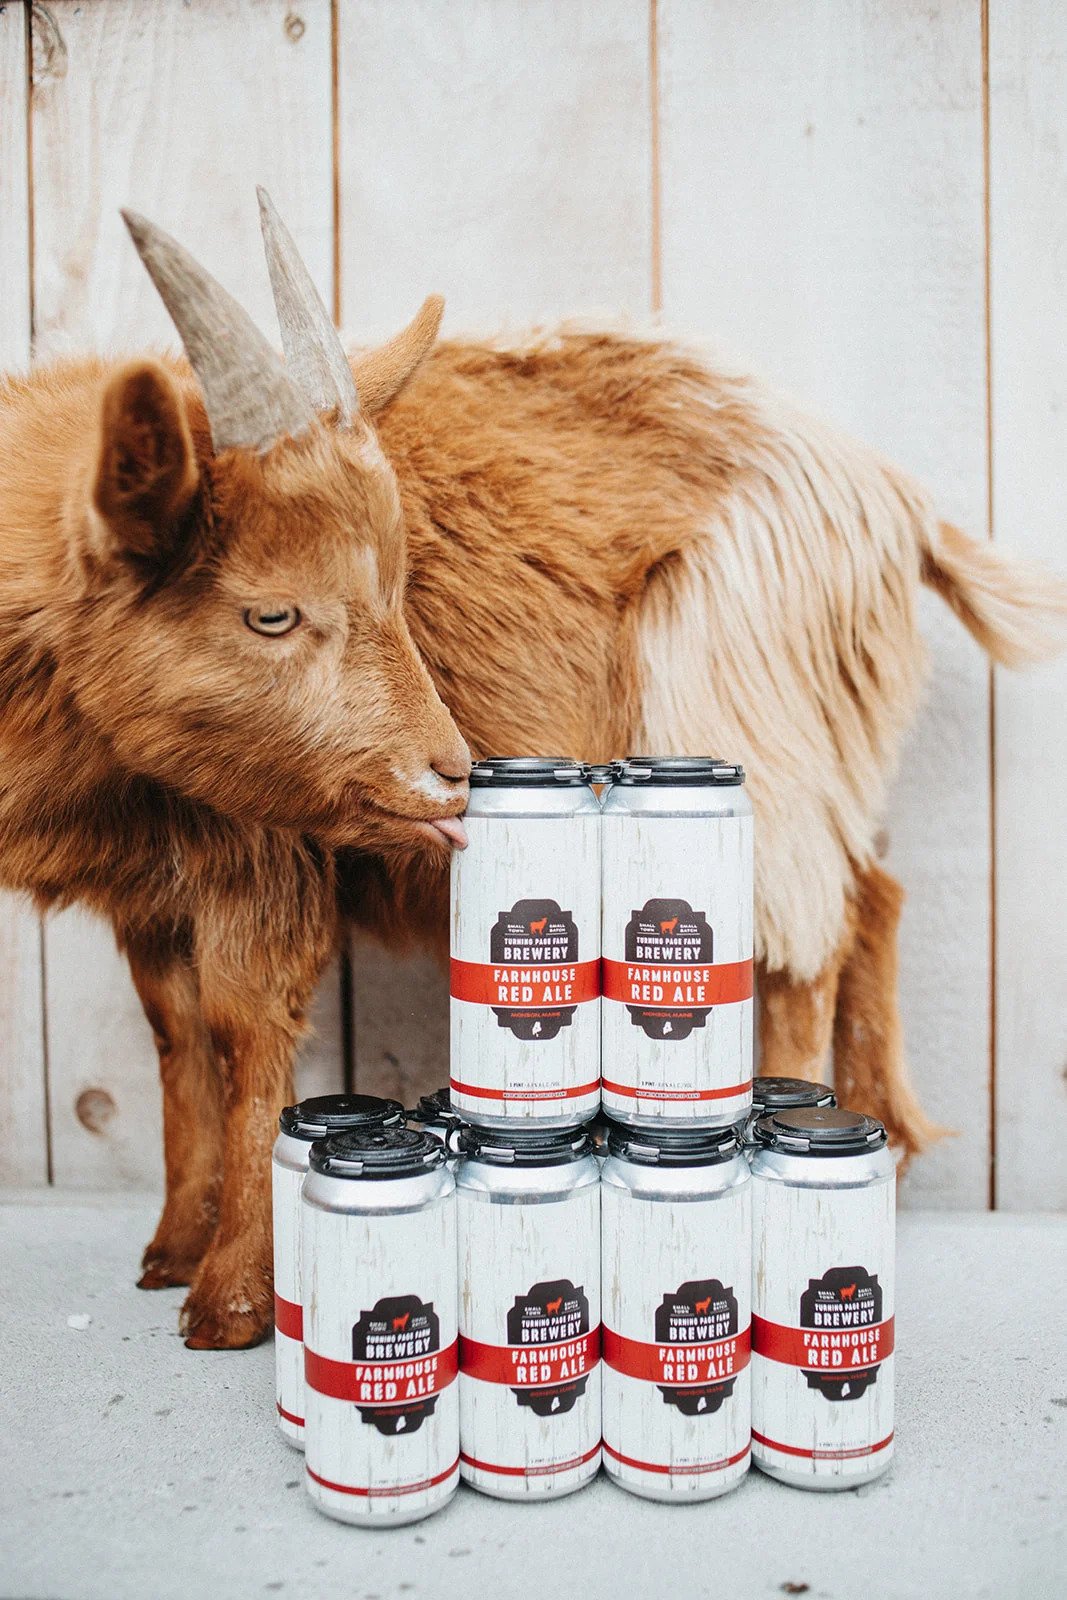 goat-with-farm-house-red-ale-from-turning-page-farm brewery-monson-maine-04464.jpg